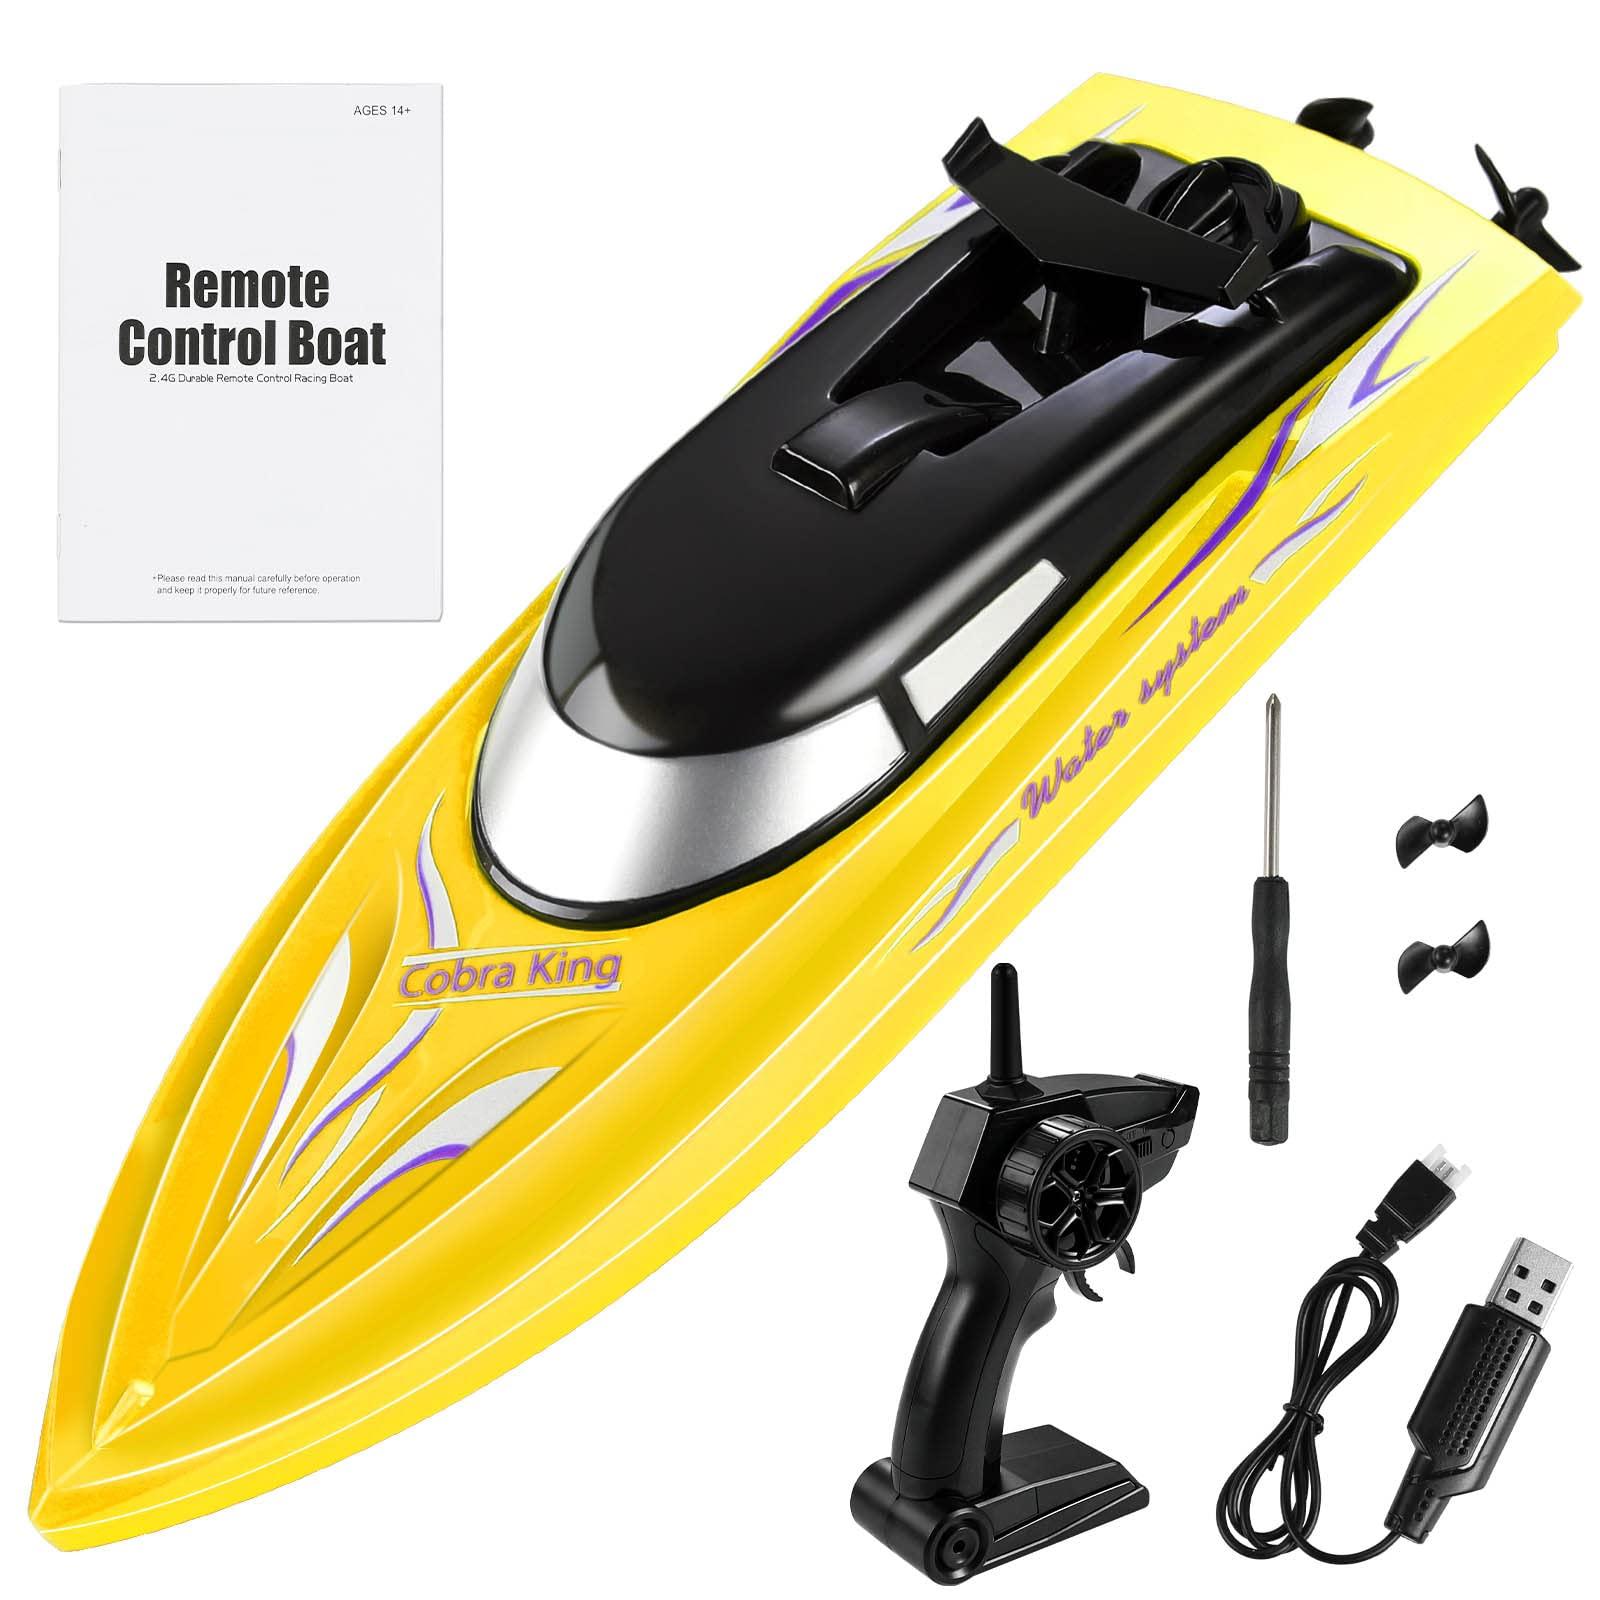 Rc Boat Yellow: Benefits and Uses of RC Boats in Yellow Color